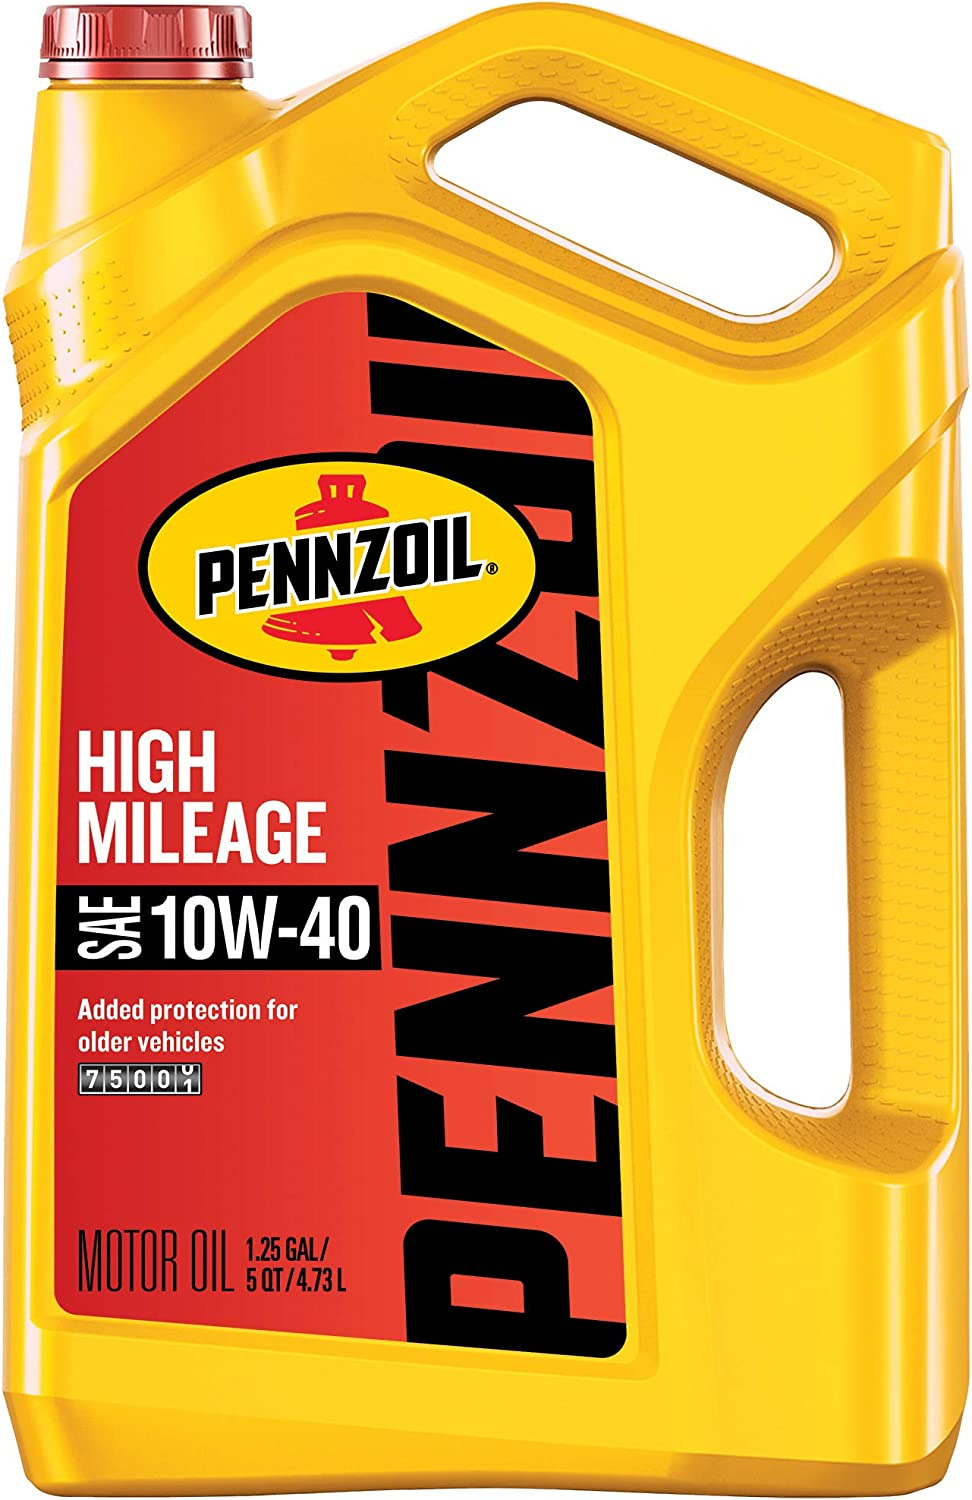 Pennzoil High Mileage Conventional 10W-40 Motor Oil for Vehicles over 75K Miles 